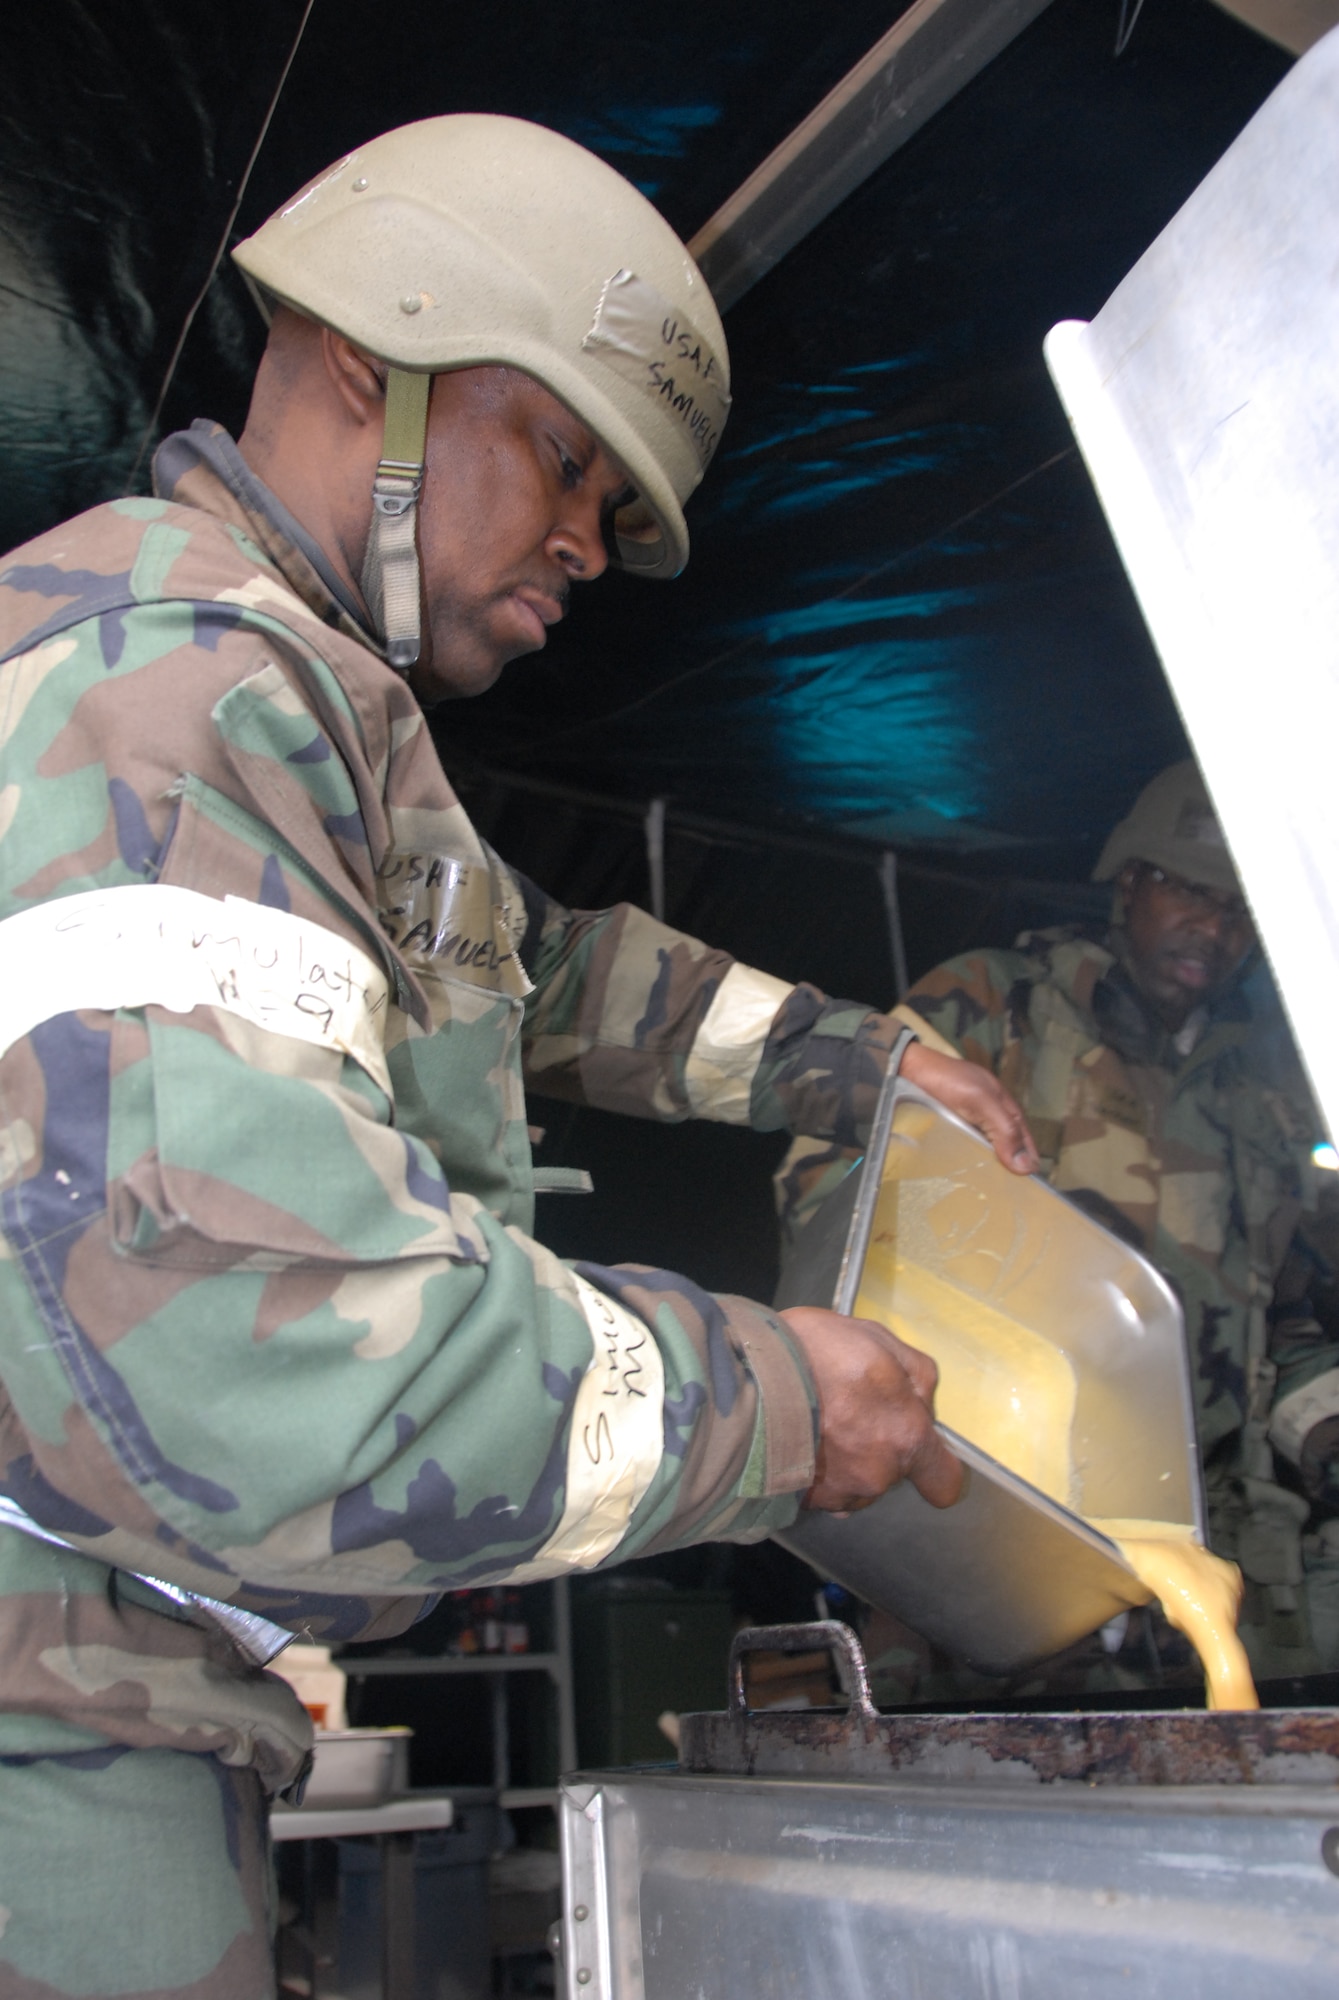 Air Force reservist, Tech. Sgt. Everett Samuels, a food-services craftsman with the 442nd Services Flight, prepares scrambled eggs for breakfast for fellow reservists during an operational-readiness exercise at Whiteman Air Force Base, Mo. The flight's parent unit, the 442nd Fighter Wing, is an Air Force Reserve A-10 Thunderbolt II unit based at Whiteman. (US Air Force photo/Master Sgt. Bill Huntington)